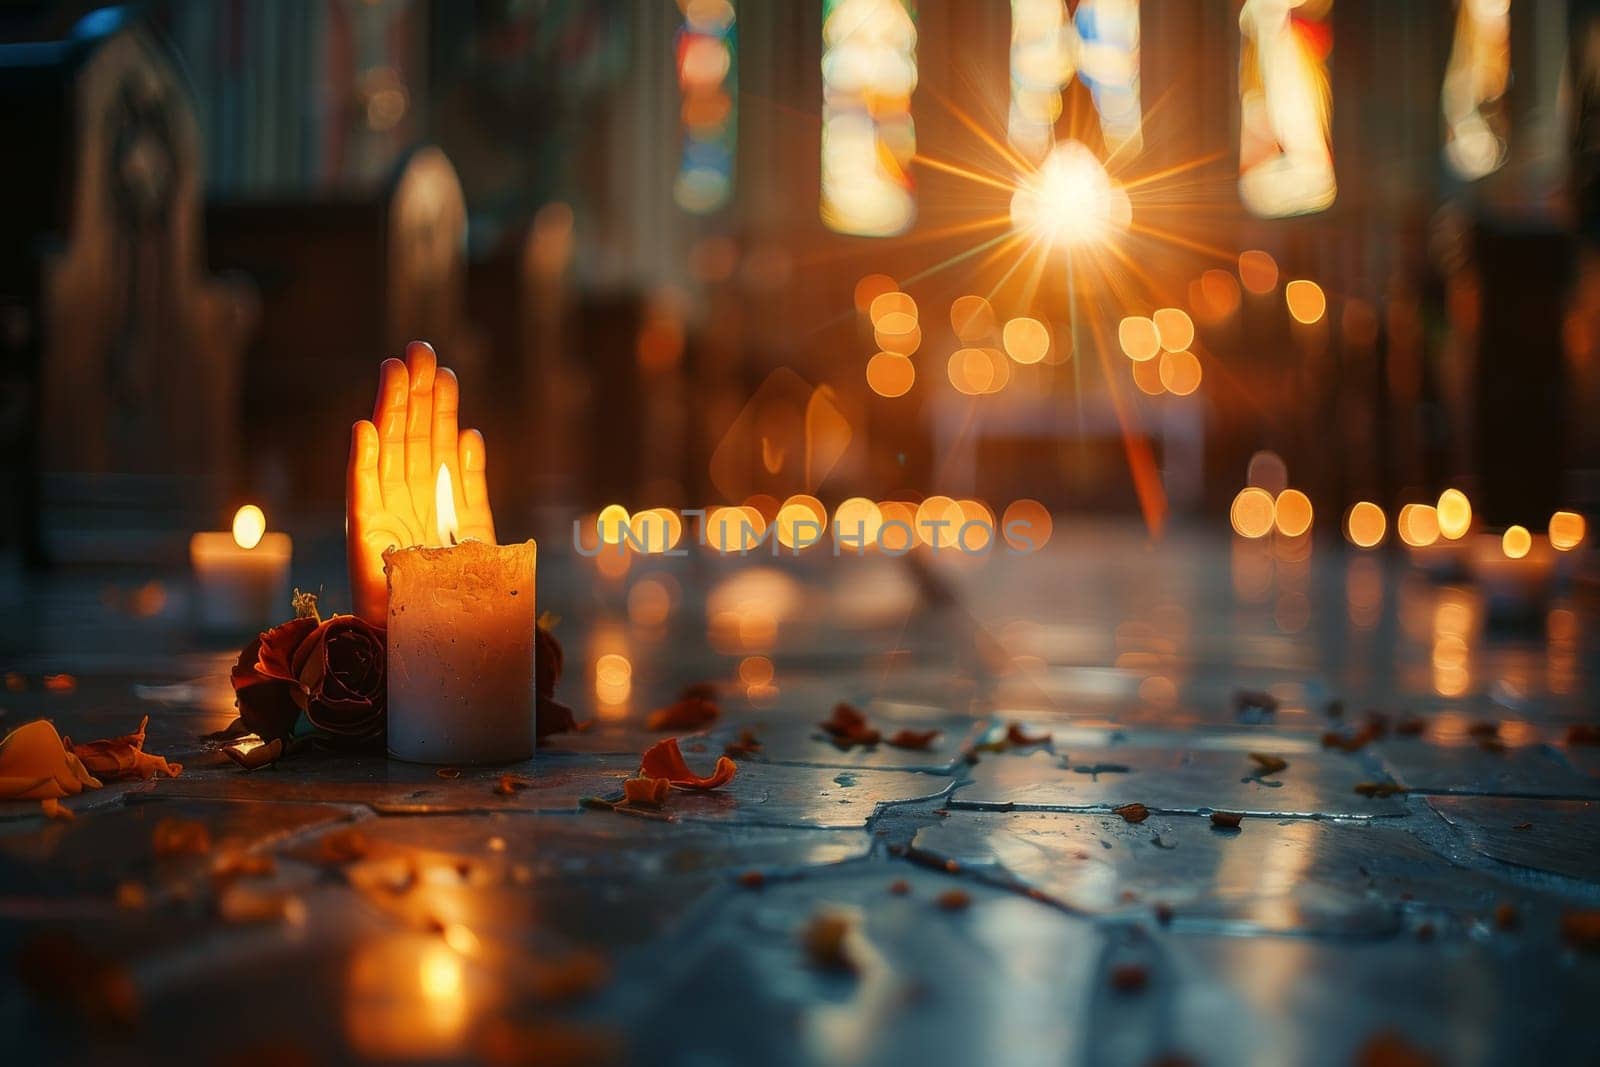 A lit candle is on the ground in a church. The candle is surrounded by flowers and leaves. The scene is peaceful and serene